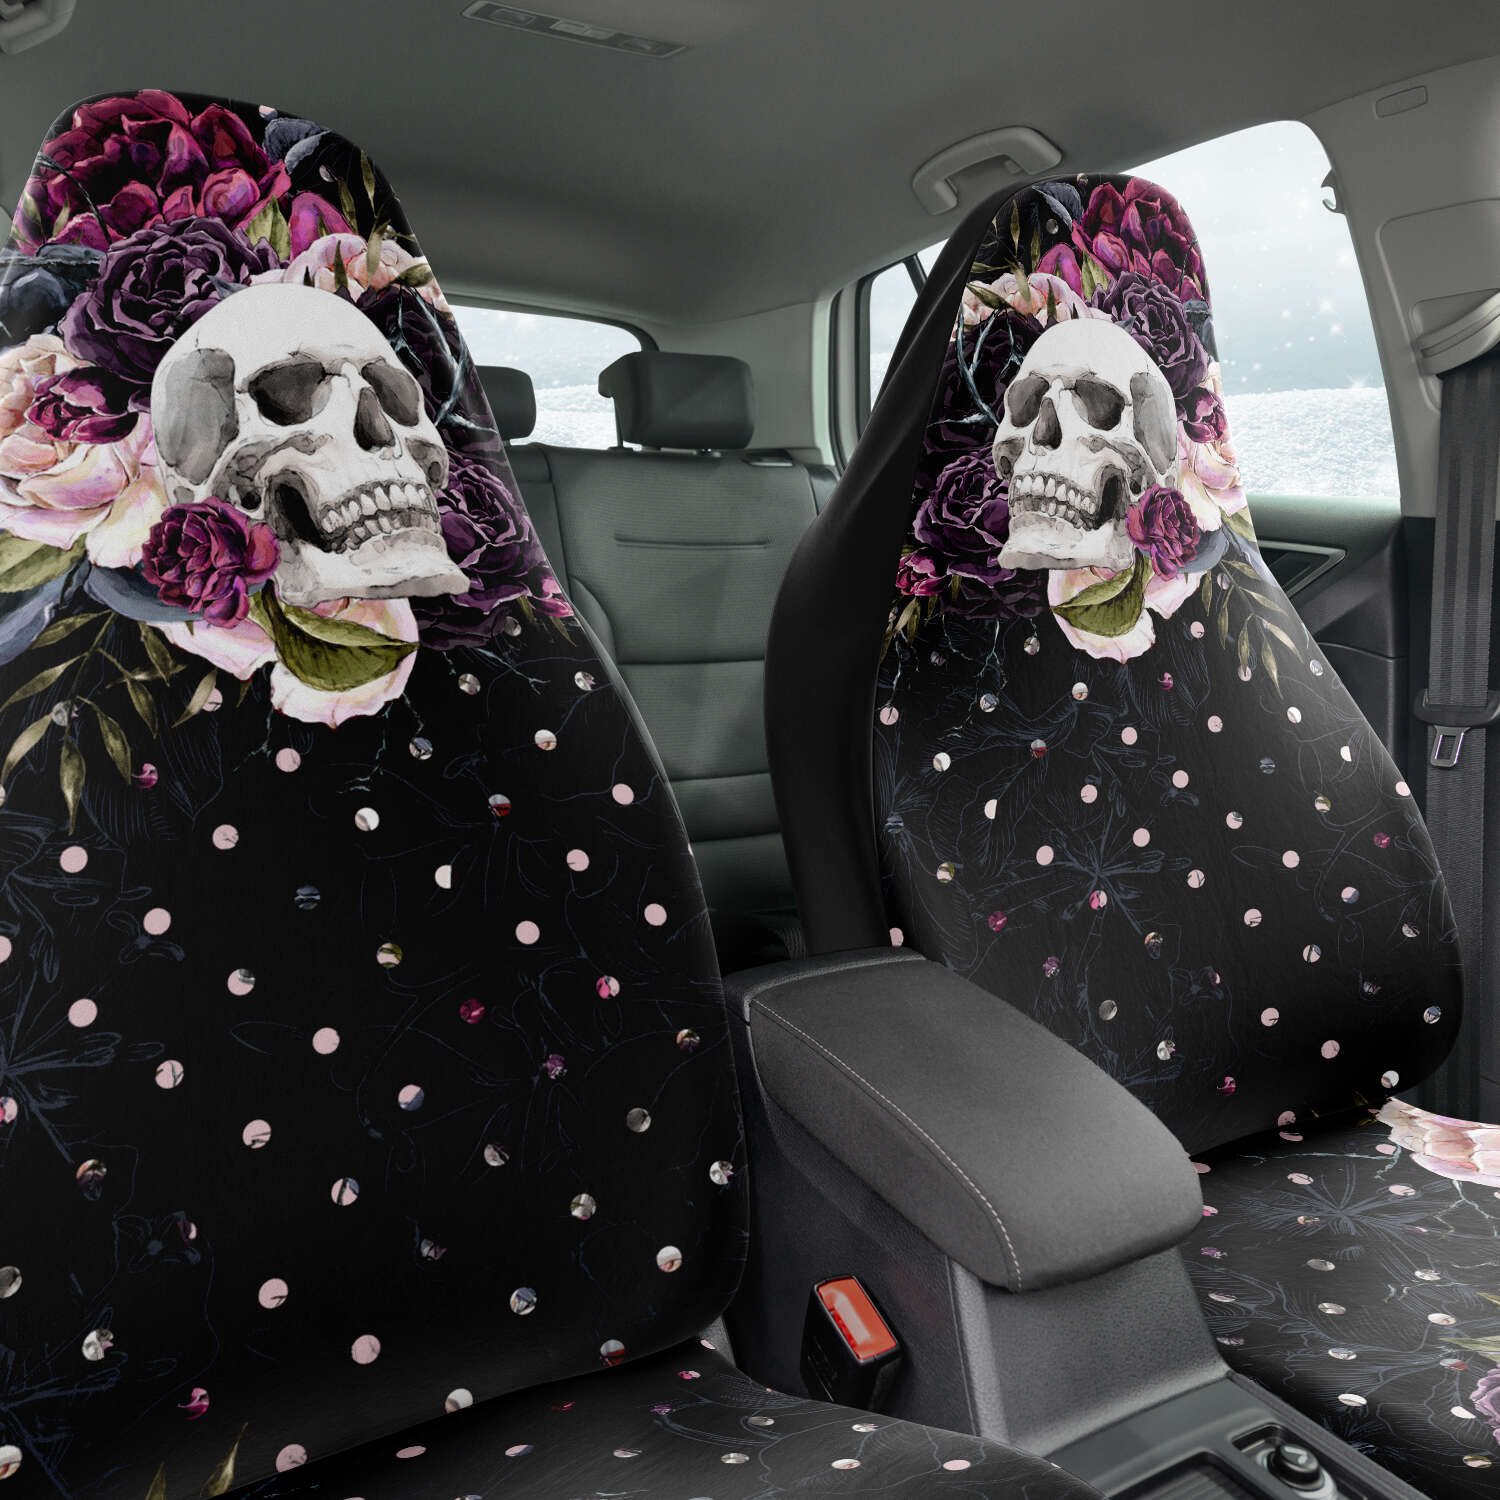 Flower Skull And Polka Dot Bouquet Car Seat Cover Set